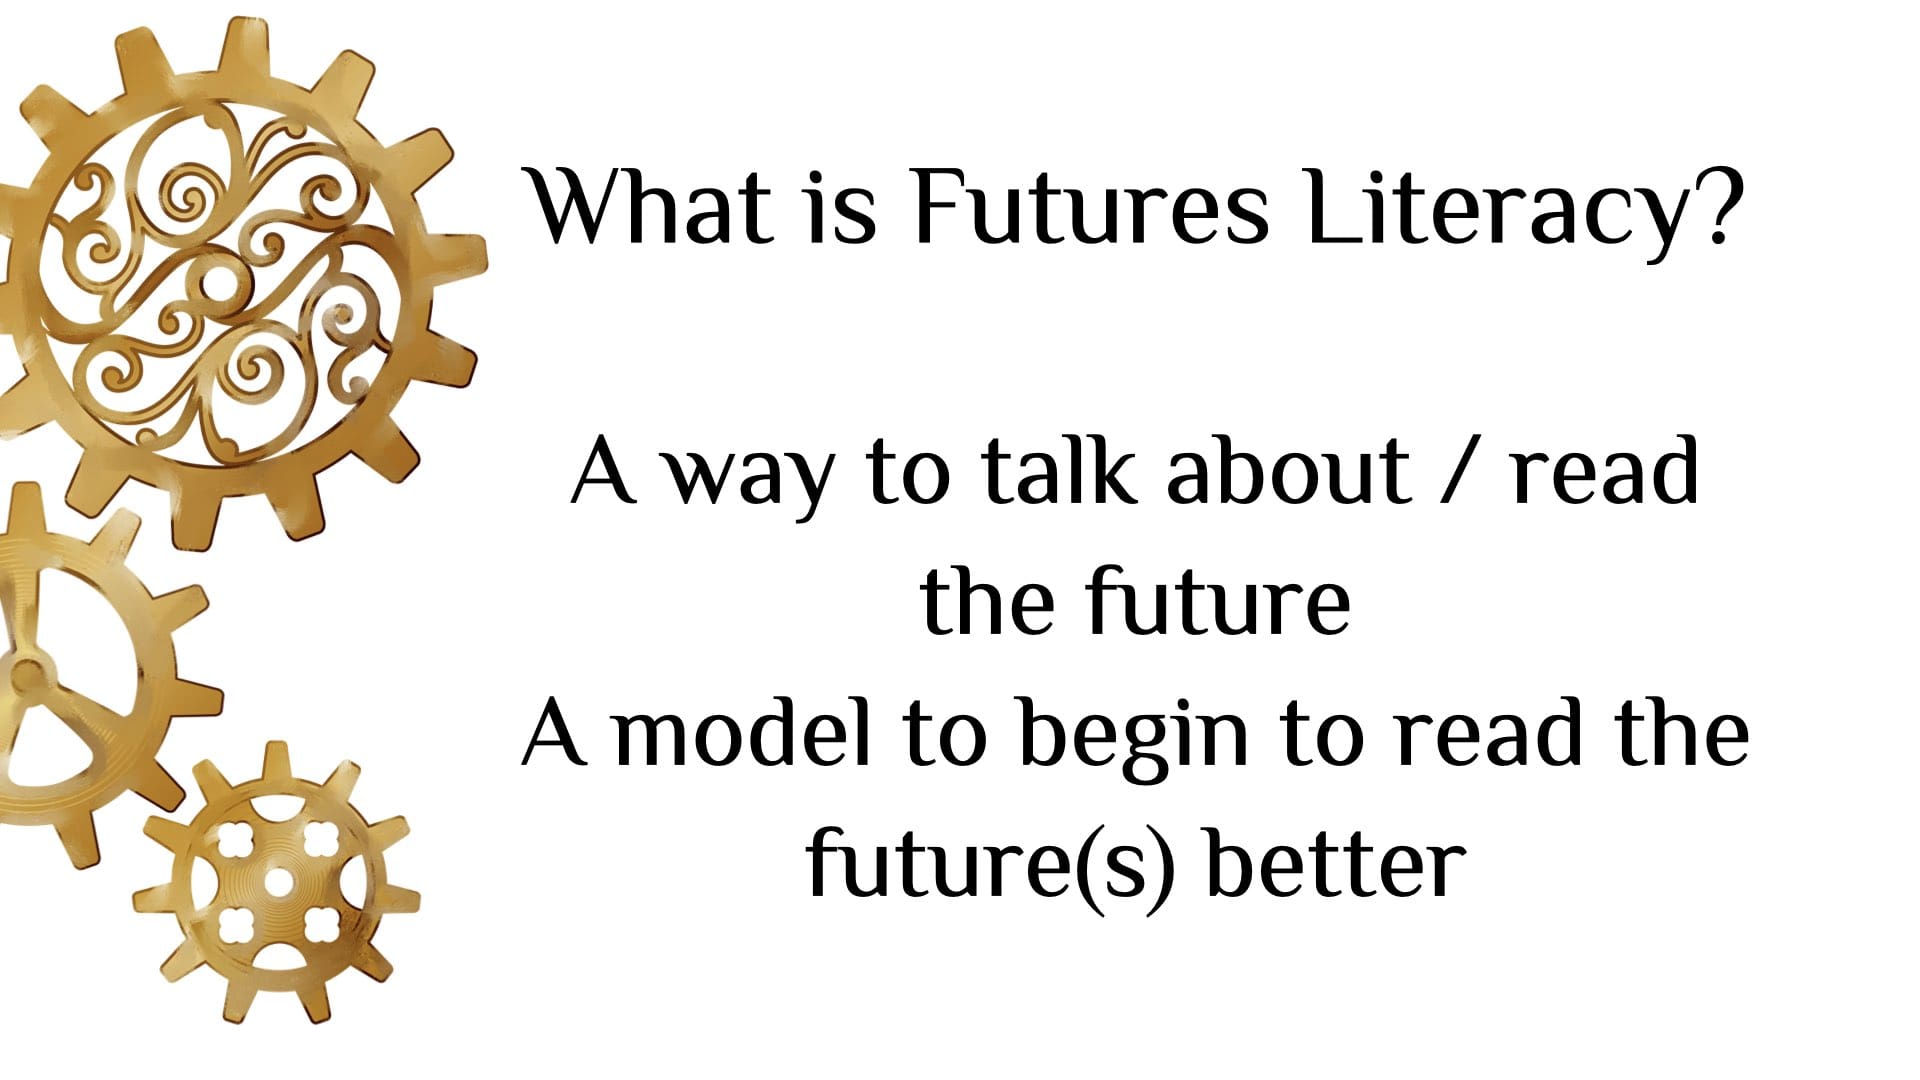 What is Futures Literacy?